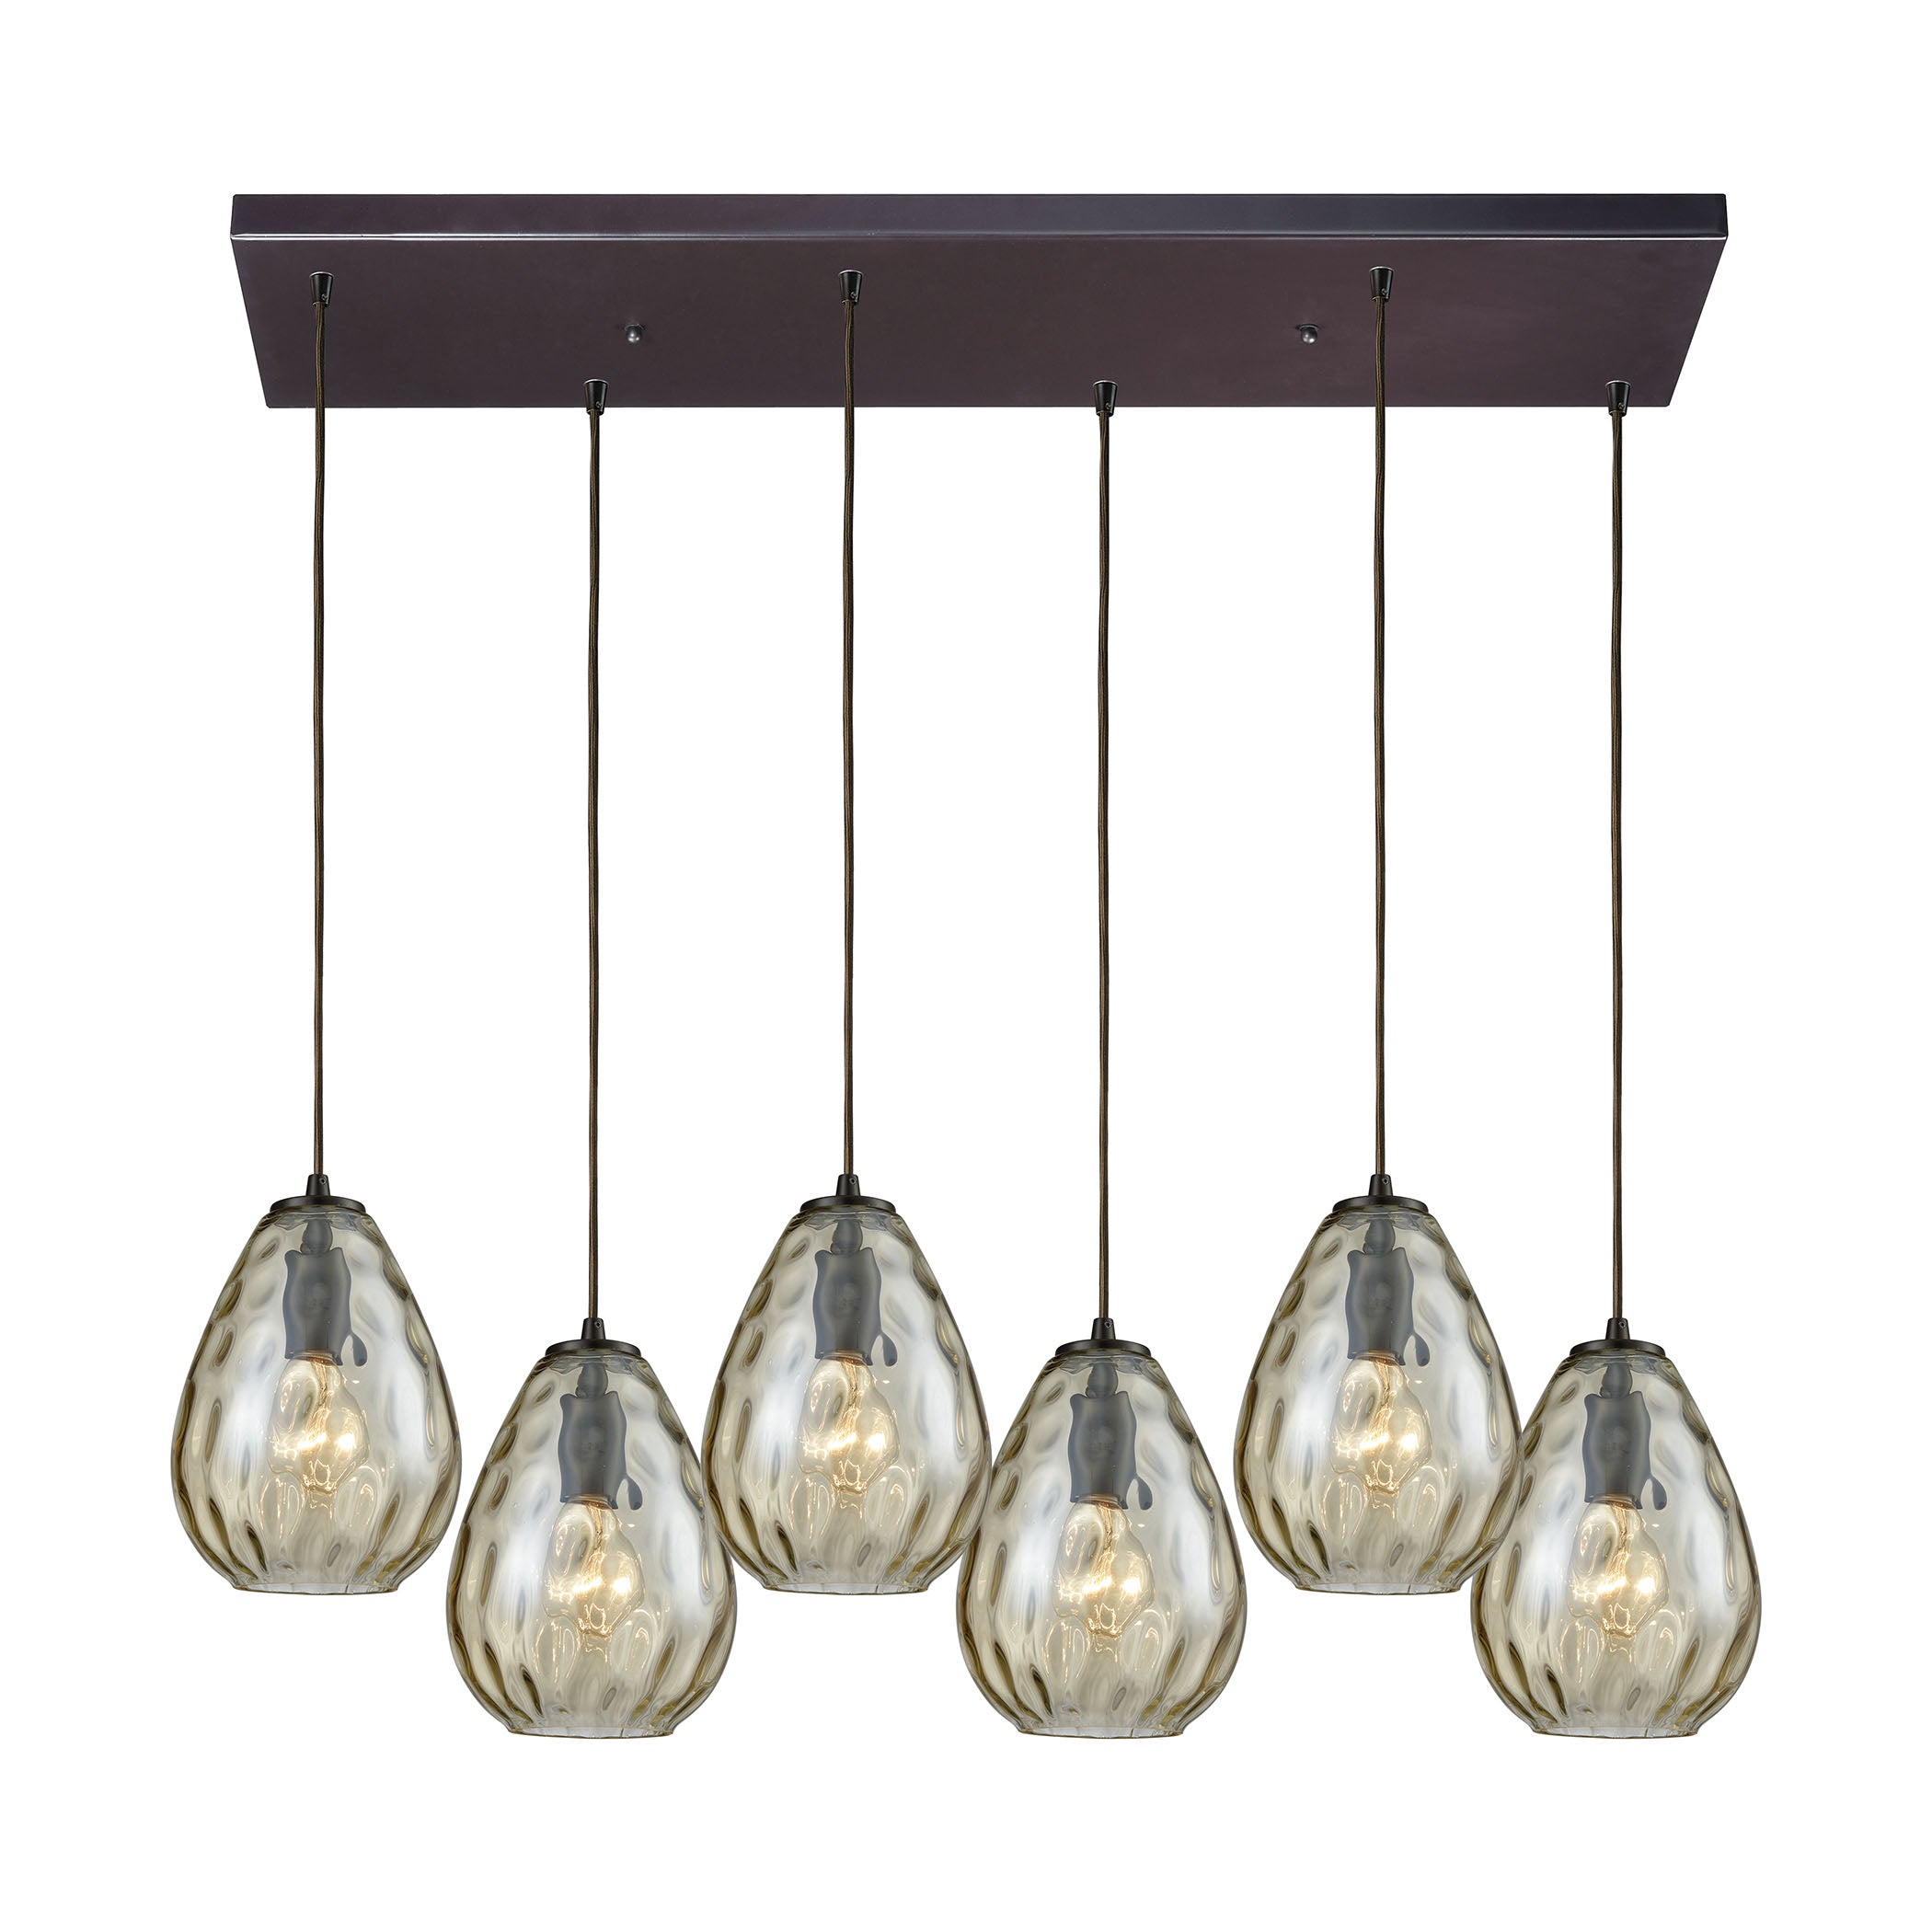 ELK Lighting 10780/6RC Lagoon 6-Light Rectangular Pendant Fixture in Oil Rubbed Bronze with Champagne-plated Water Glass